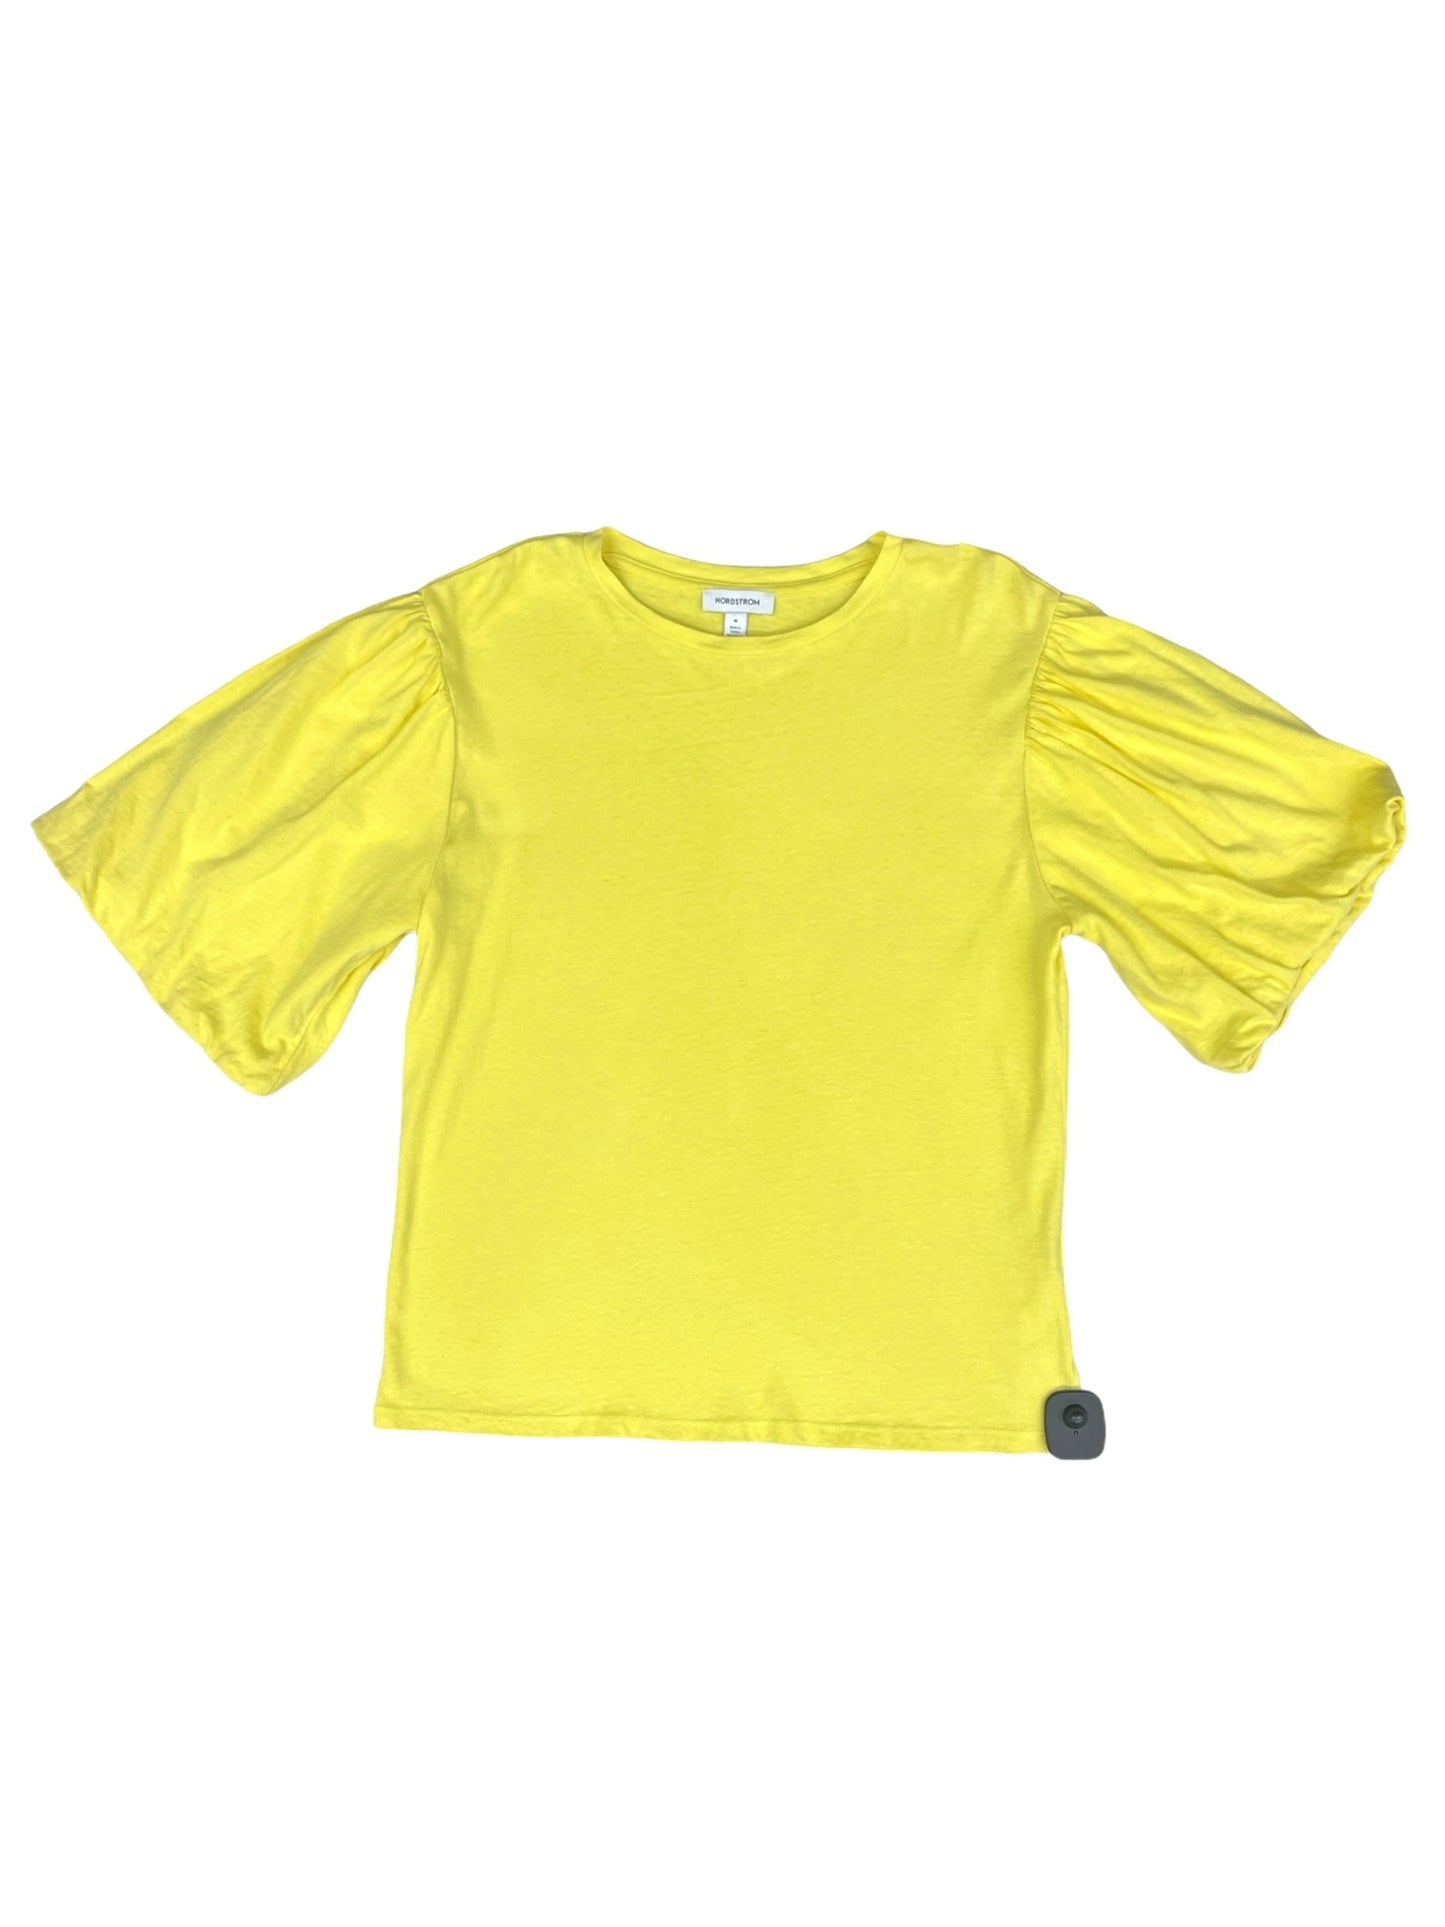 Yellow Top Short Sleeve Nordstrom, Size M